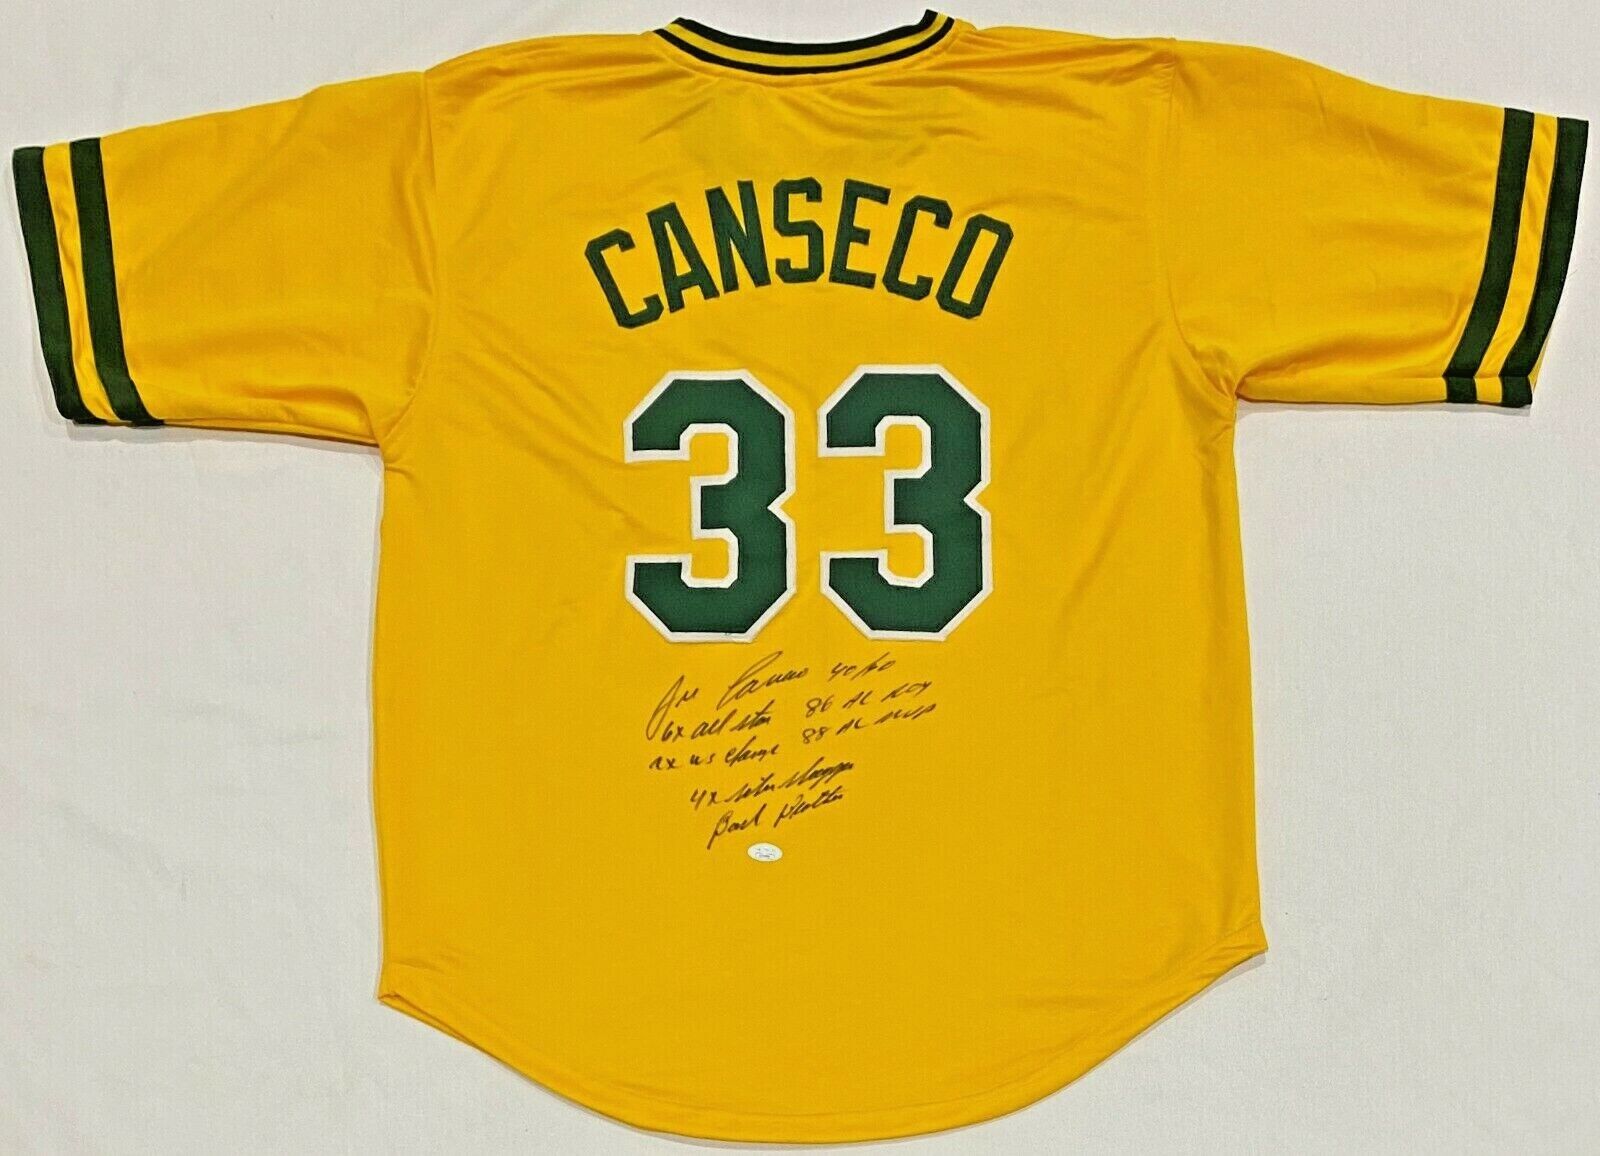 Jose Canseco Signed Autographed Yellow Jersey JSA Authenticated 7 Inscriptions